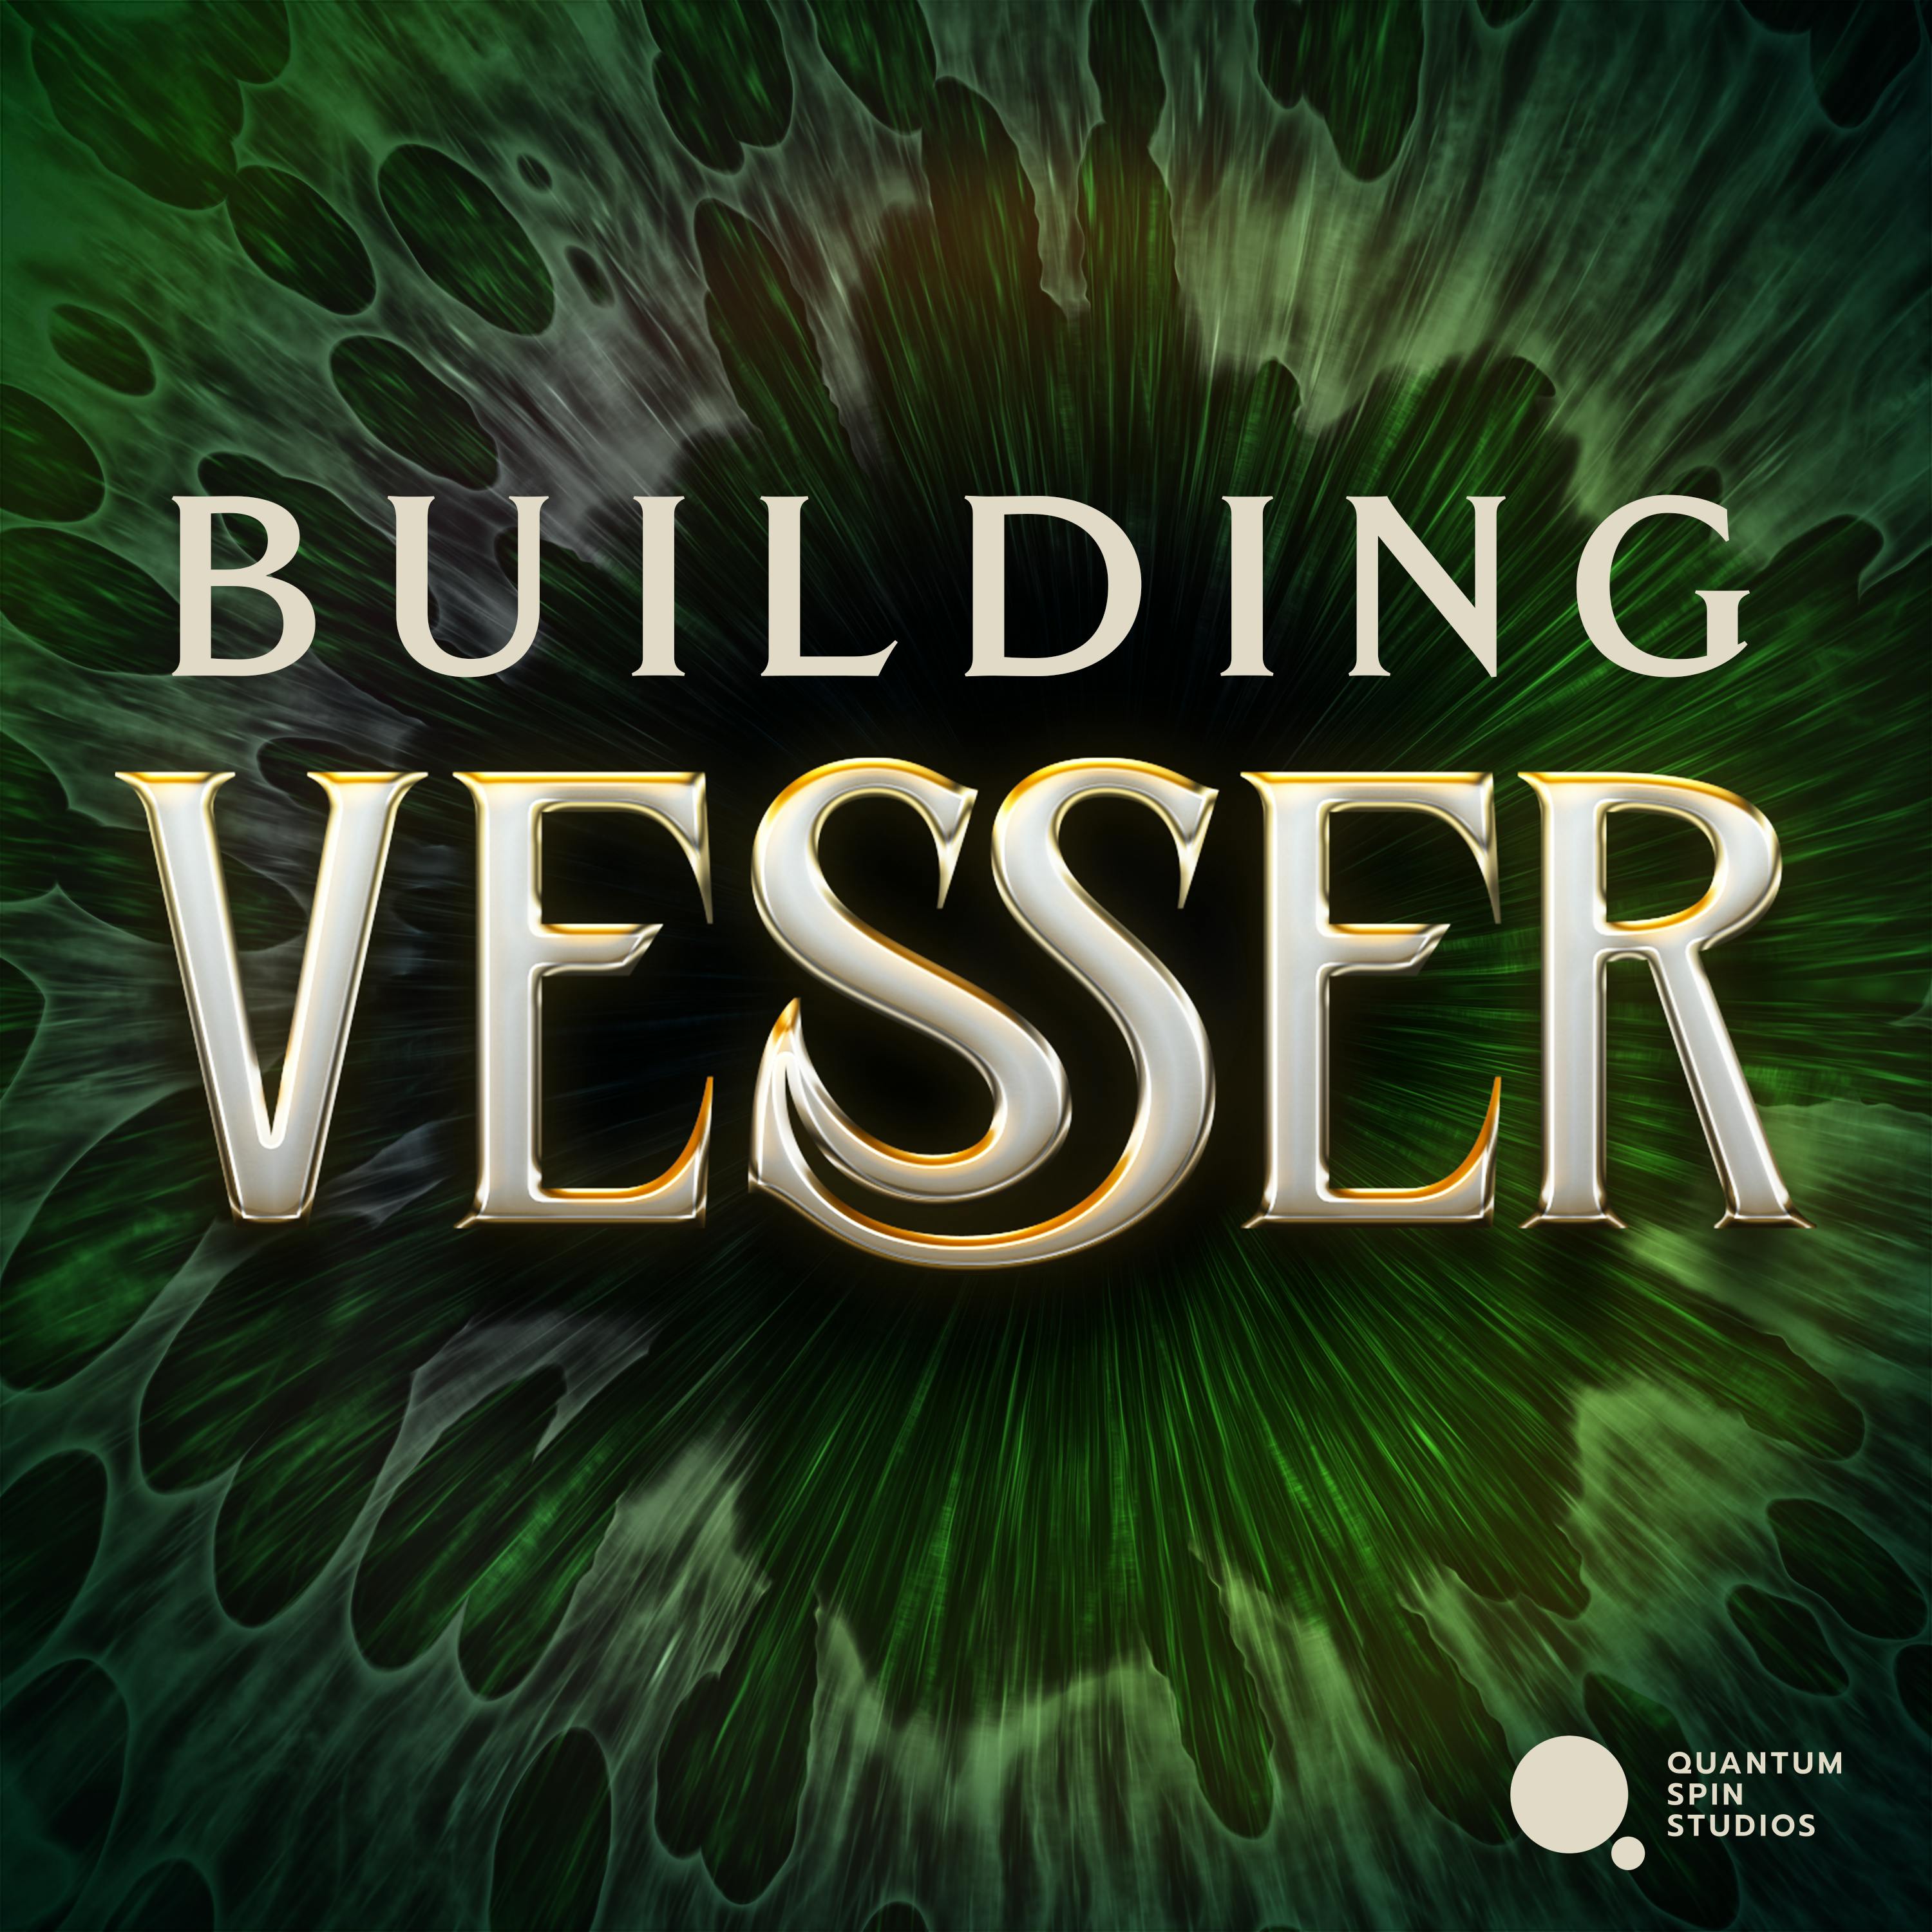 Building Vesser: Titans, Being Born Emergent, and Life in Exile